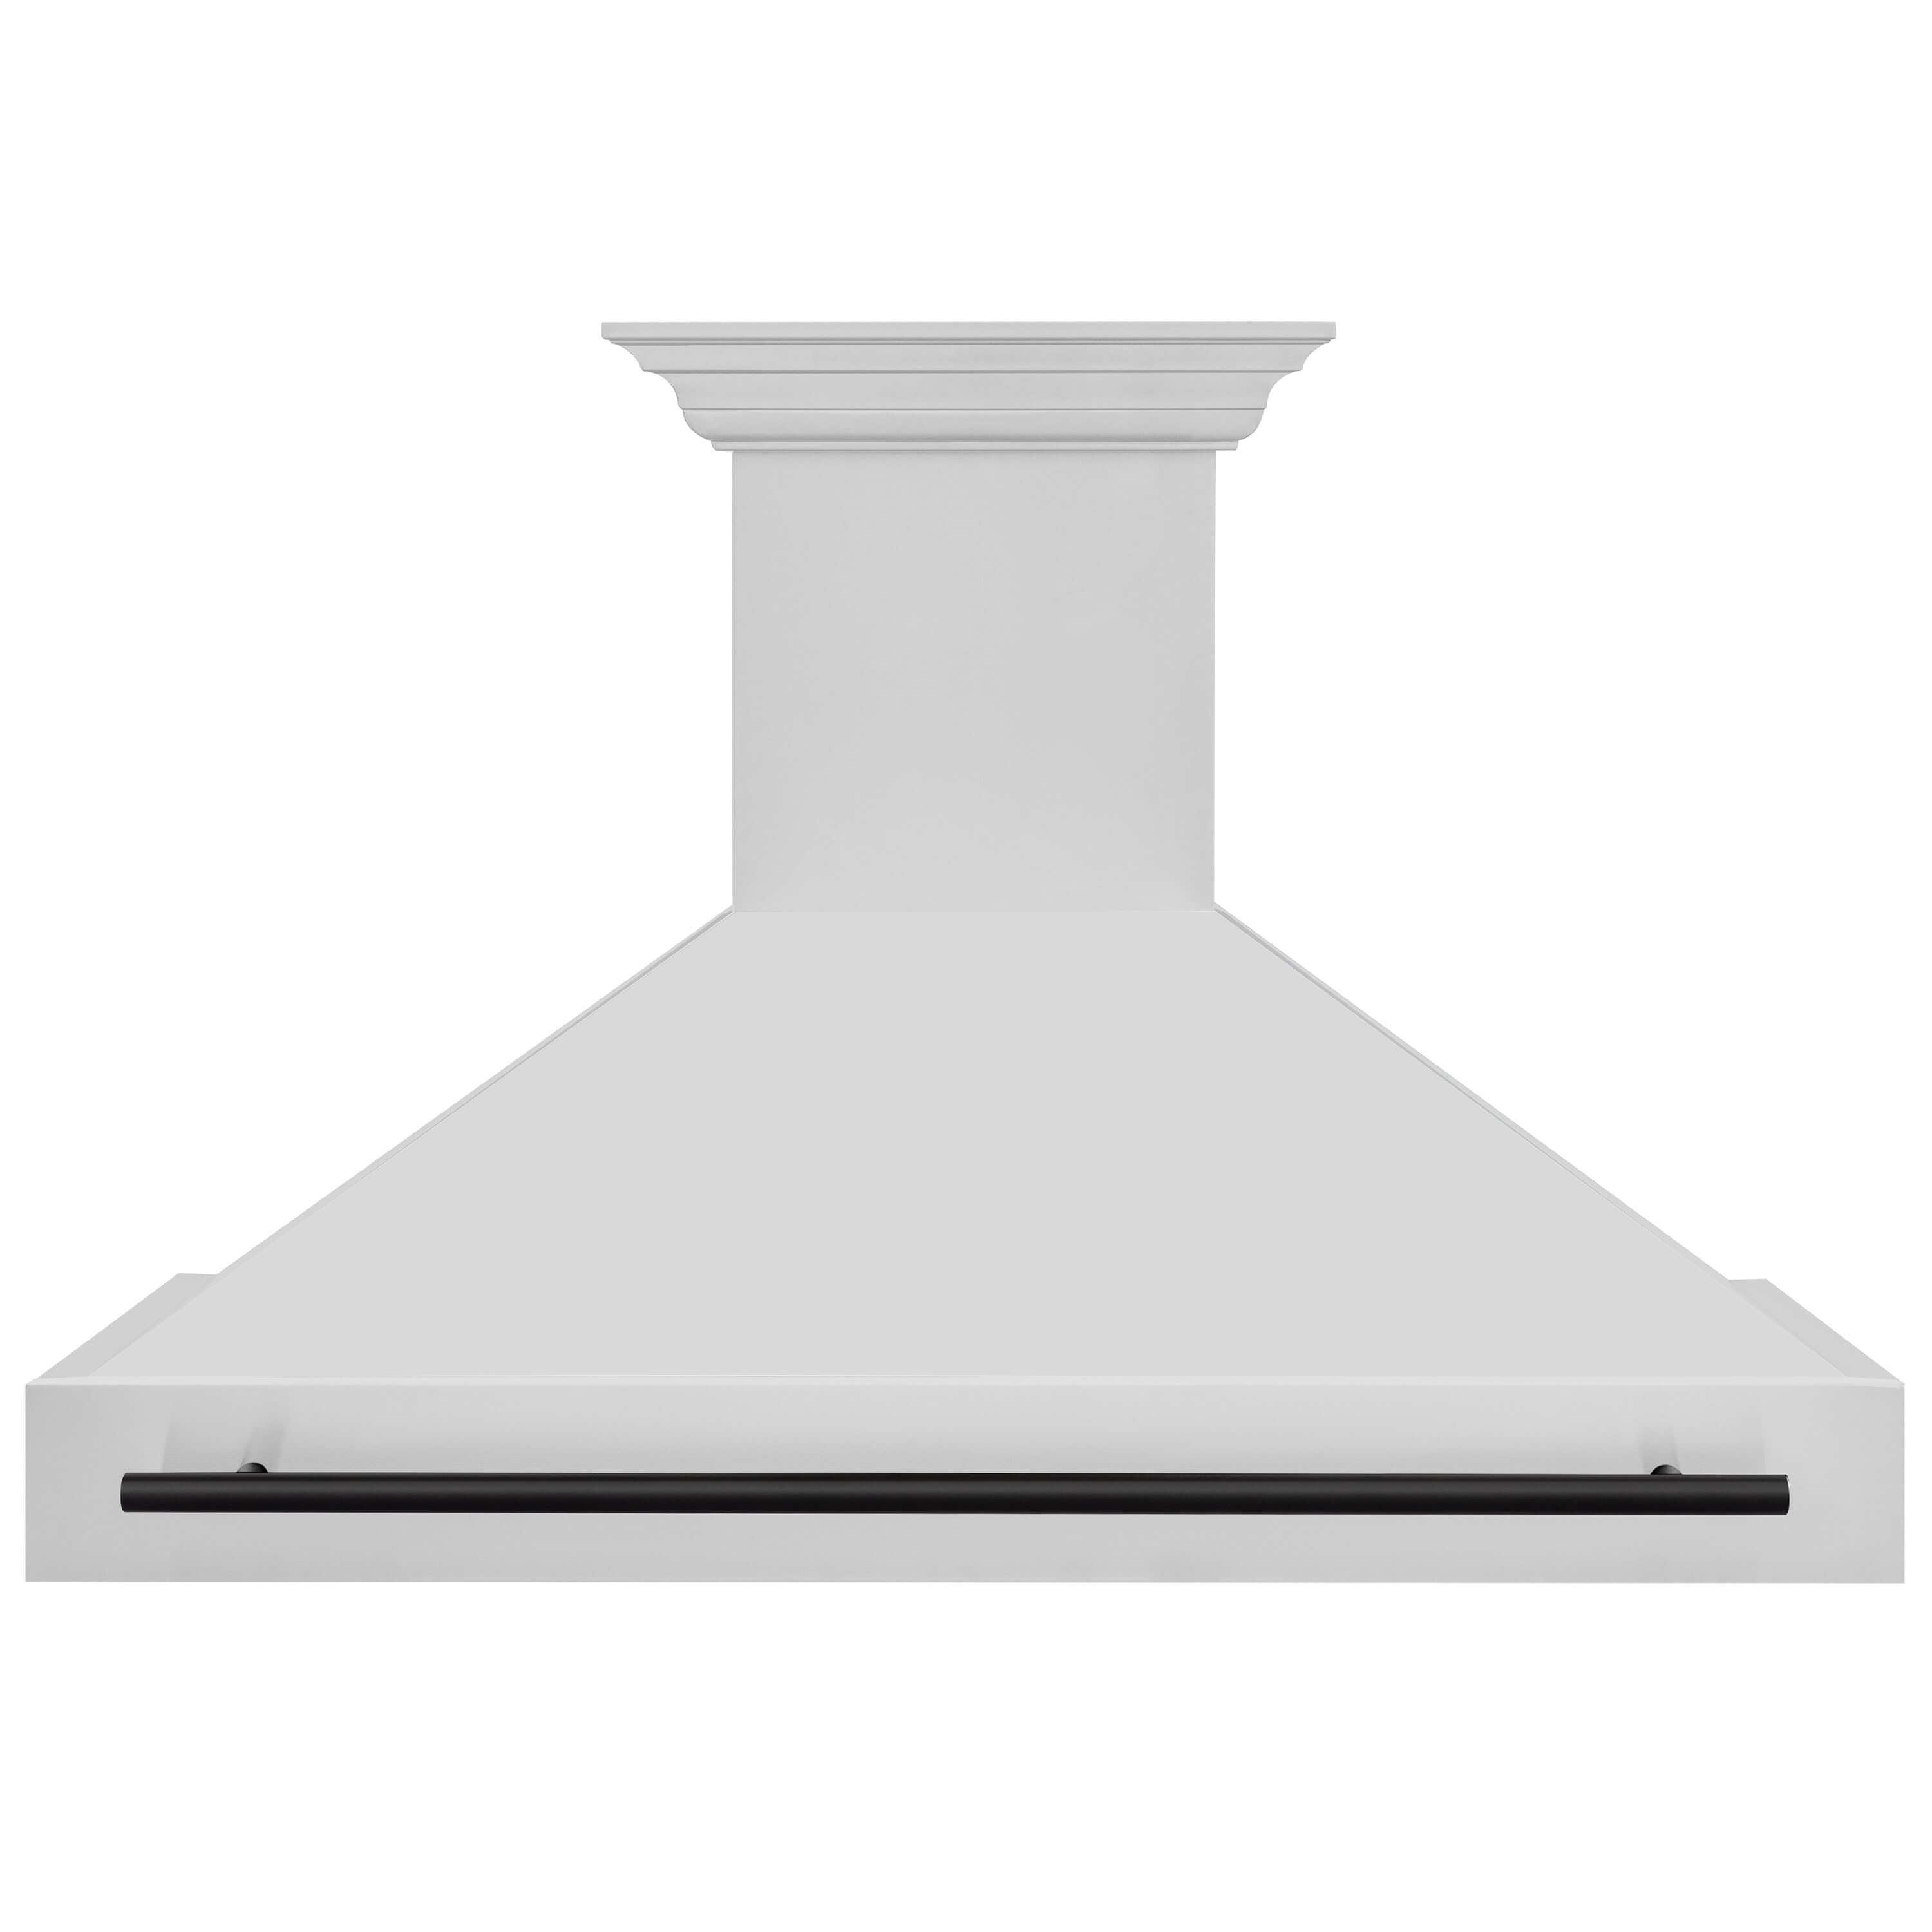 ZLINE 48" Autograph Edition Stainless Steel Range Hood with Stainless Steel Shell and Matte Black Handle (8654STZ-48-MB)